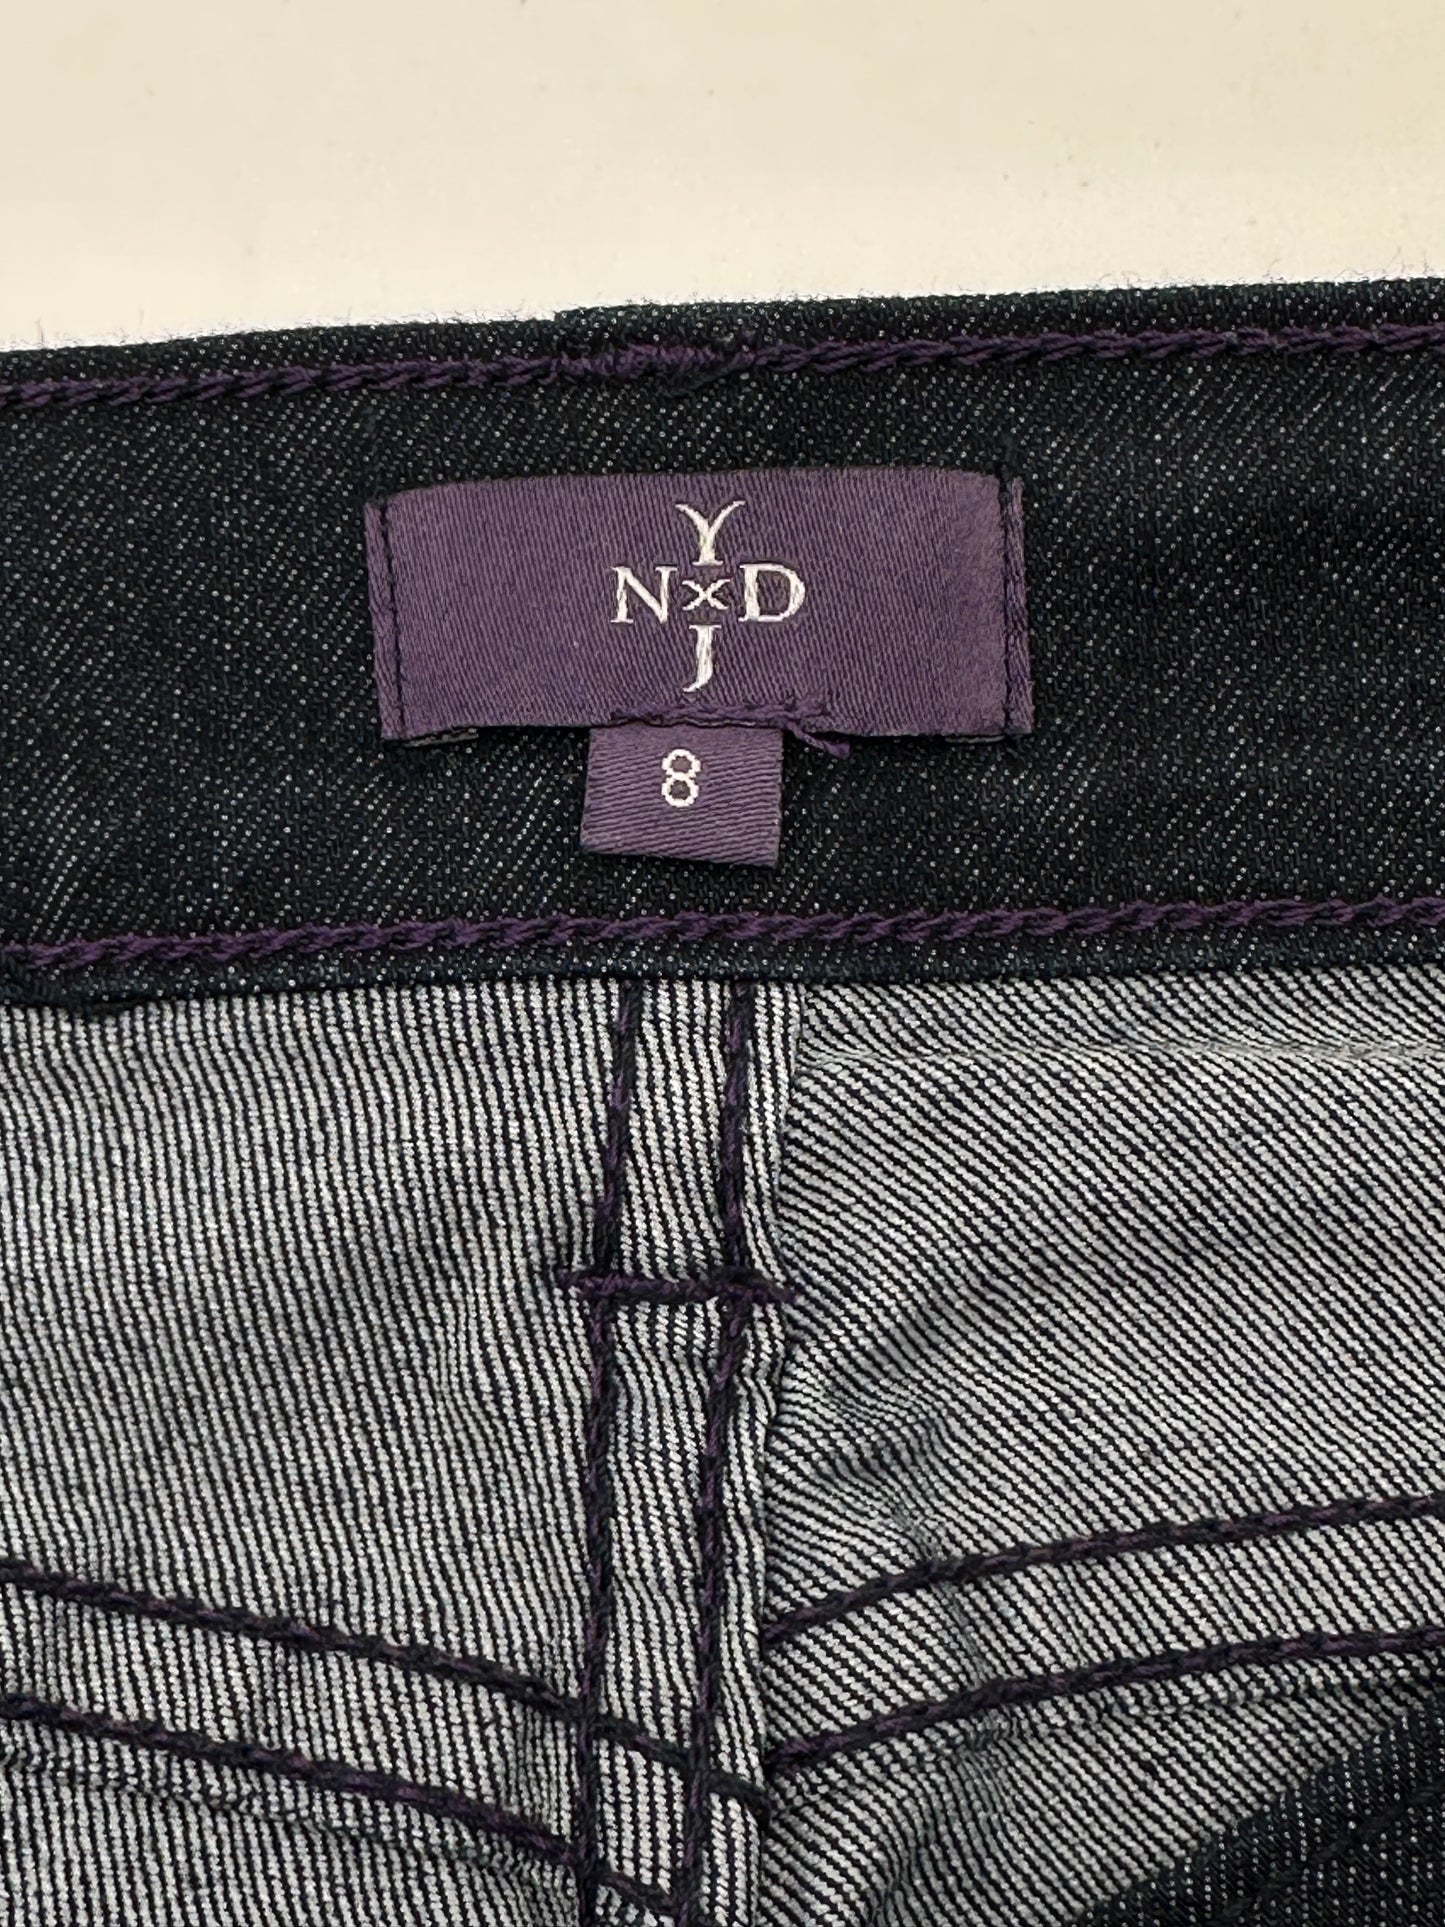 NYDJ Not Your Daughter's Jeans Size 8 Blue Dark Wash Boot Cut Jeans, new/NWOT